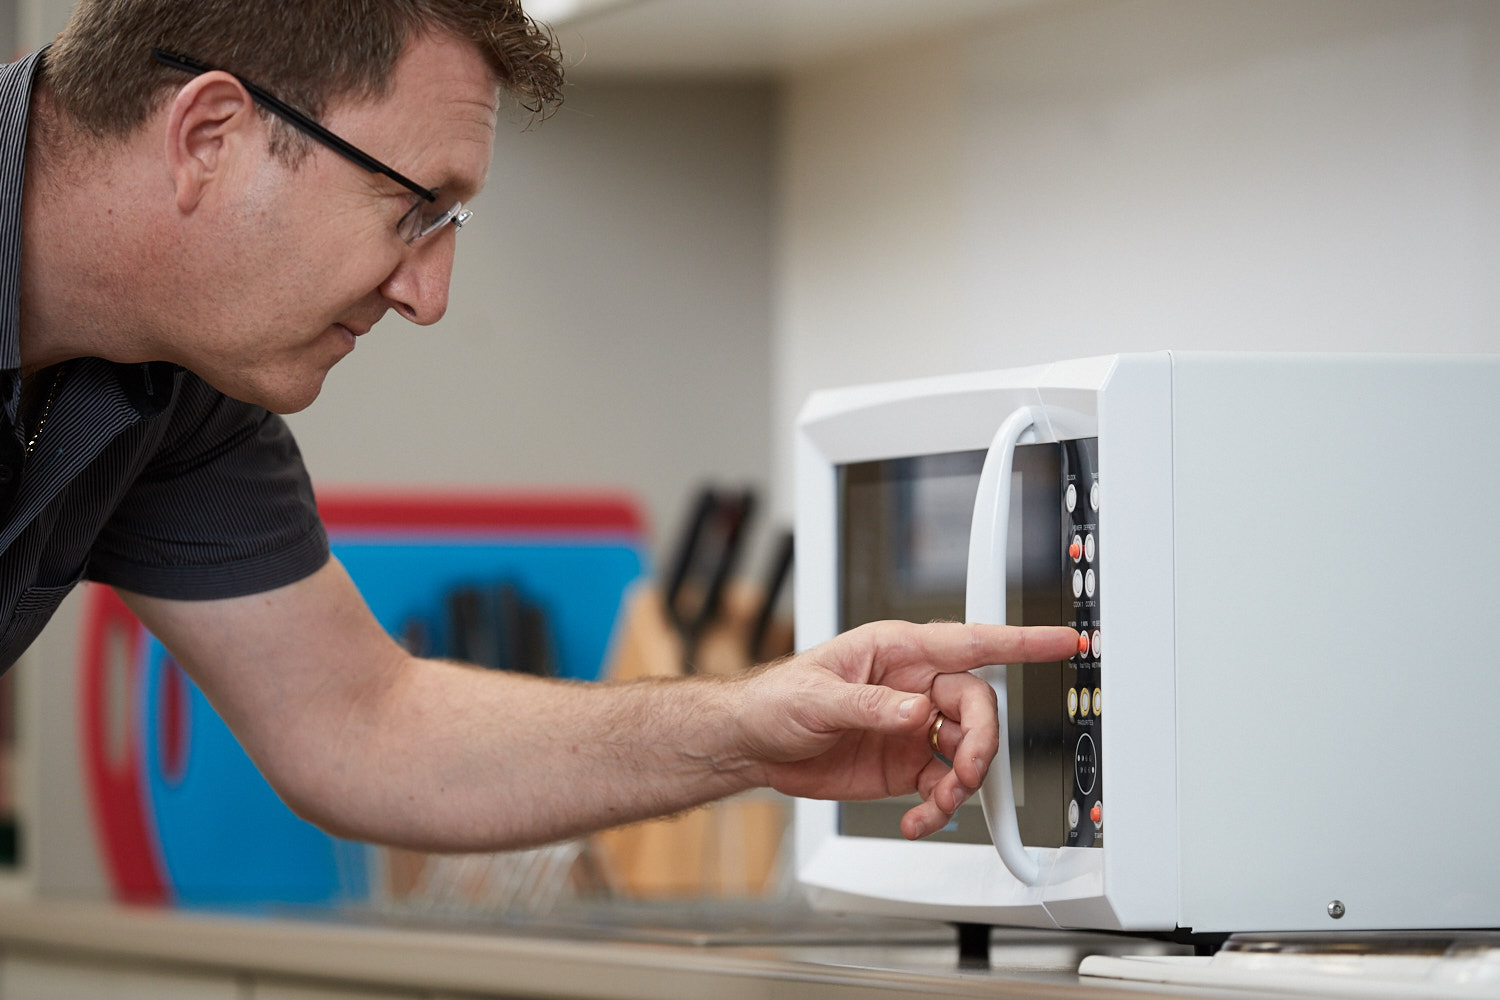 A man uses a microwave fitted with tactile dots